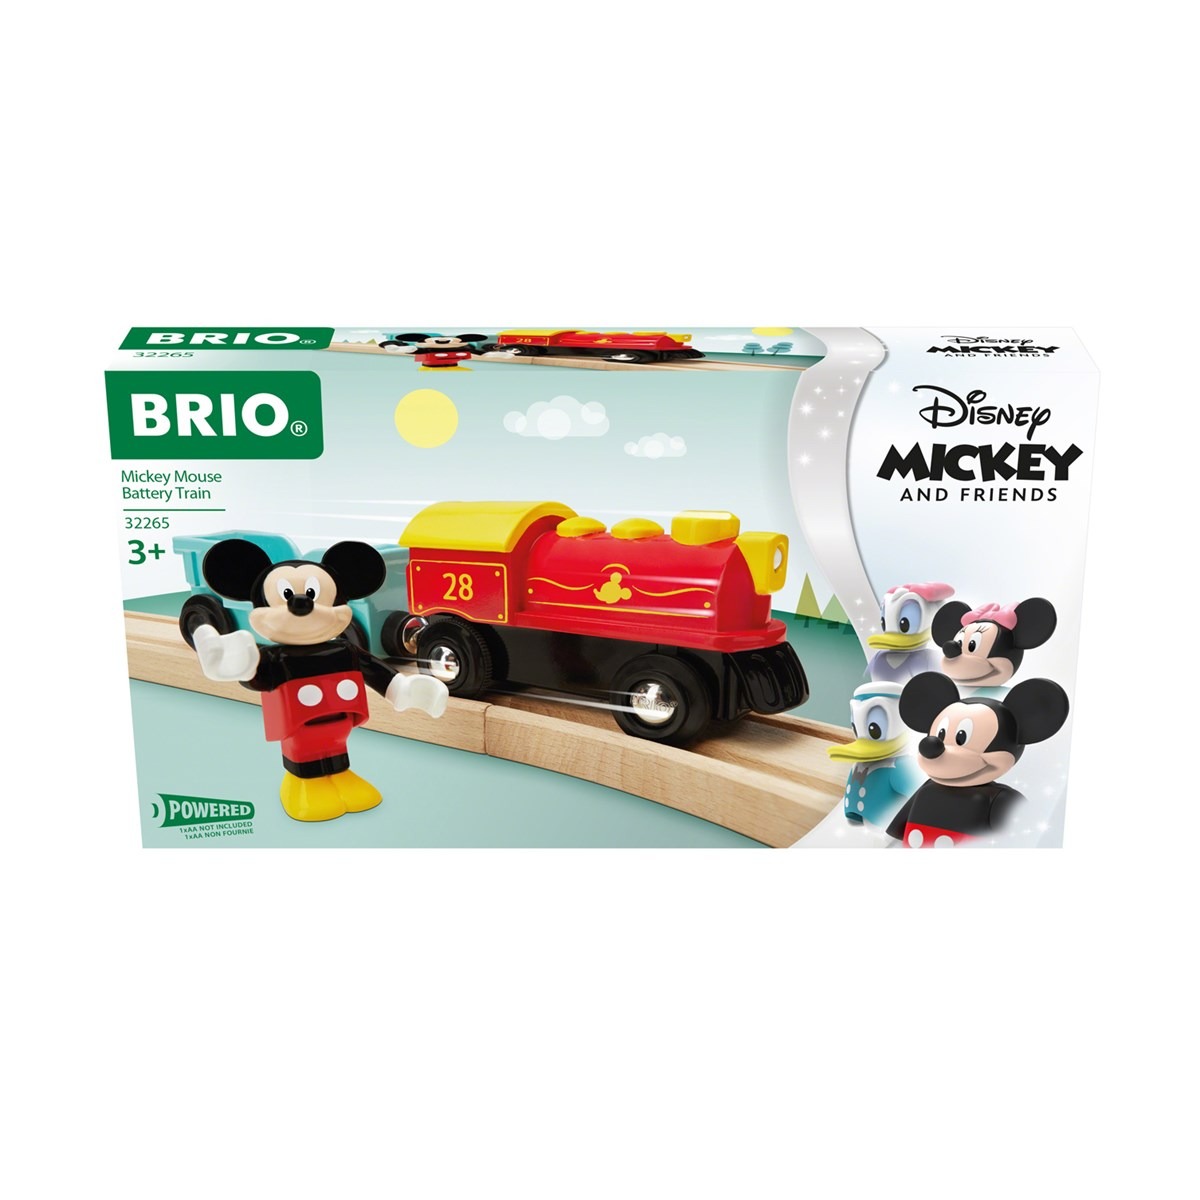 Mickey Mouse Batteri tog